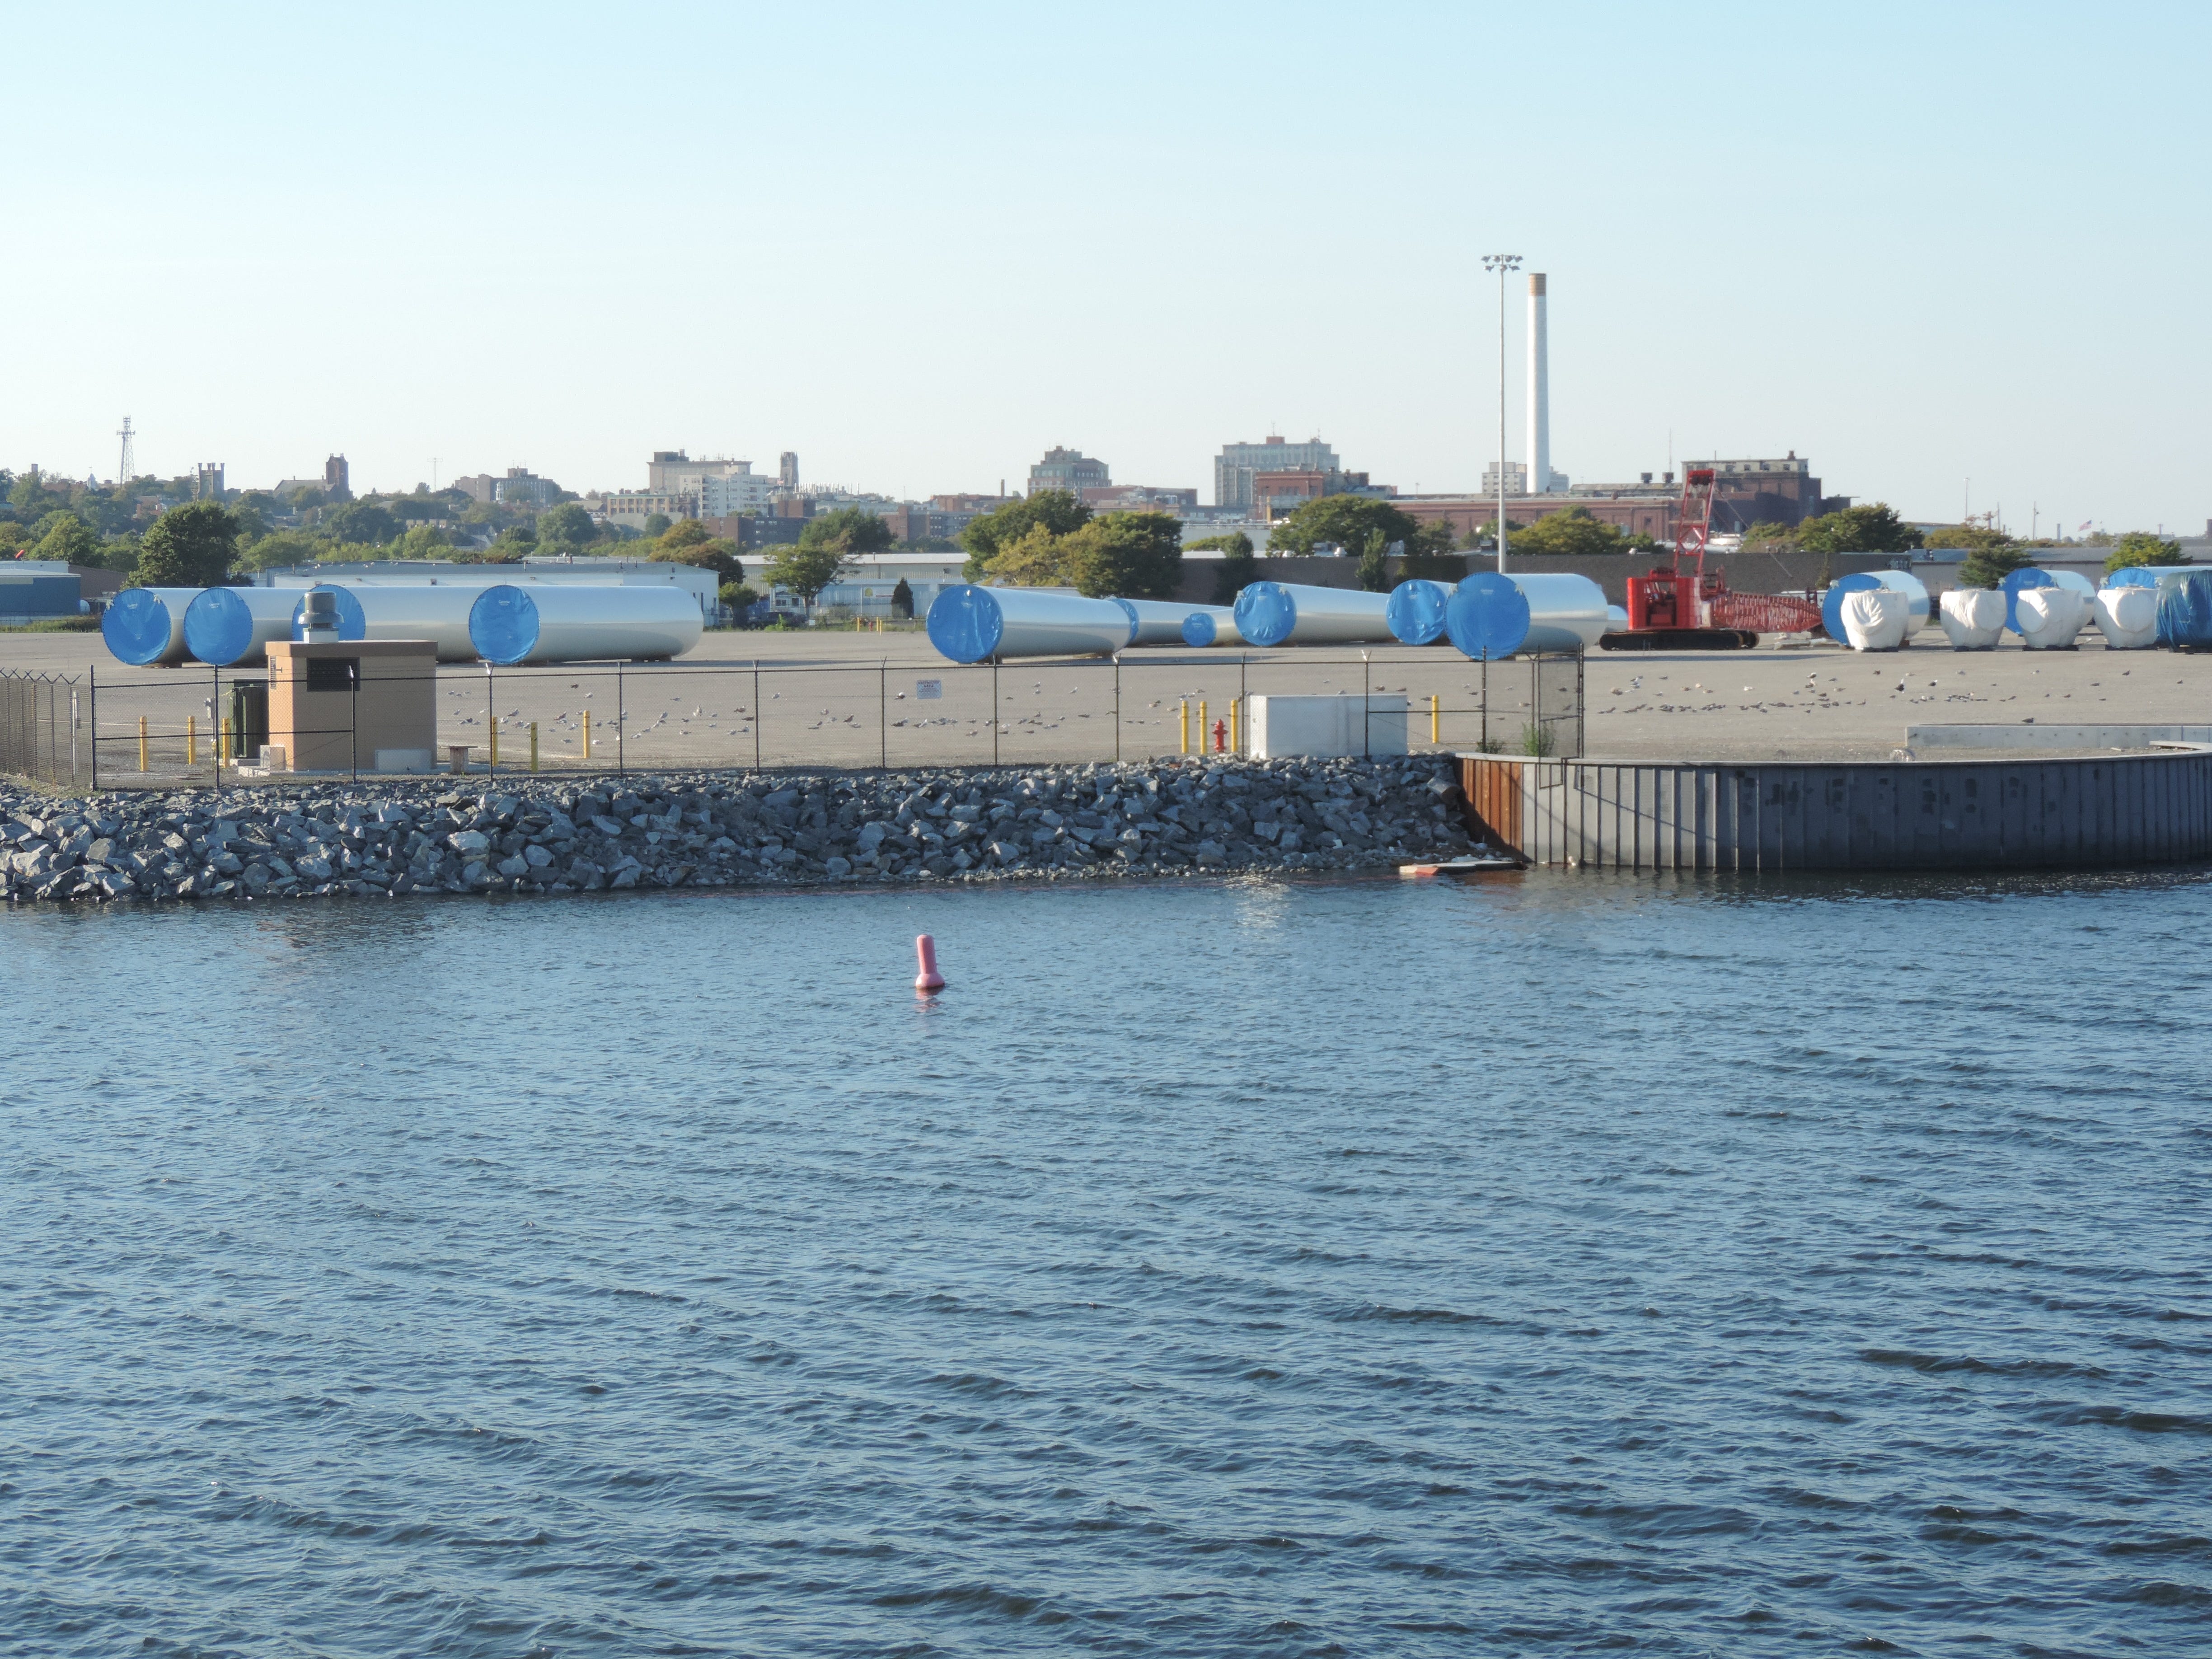 Wind turbine components shipped by Spain-based Gamesa sit at the Marine Commerce Terminal in New Bedford after arriving in the U.S. on two cargo ships.